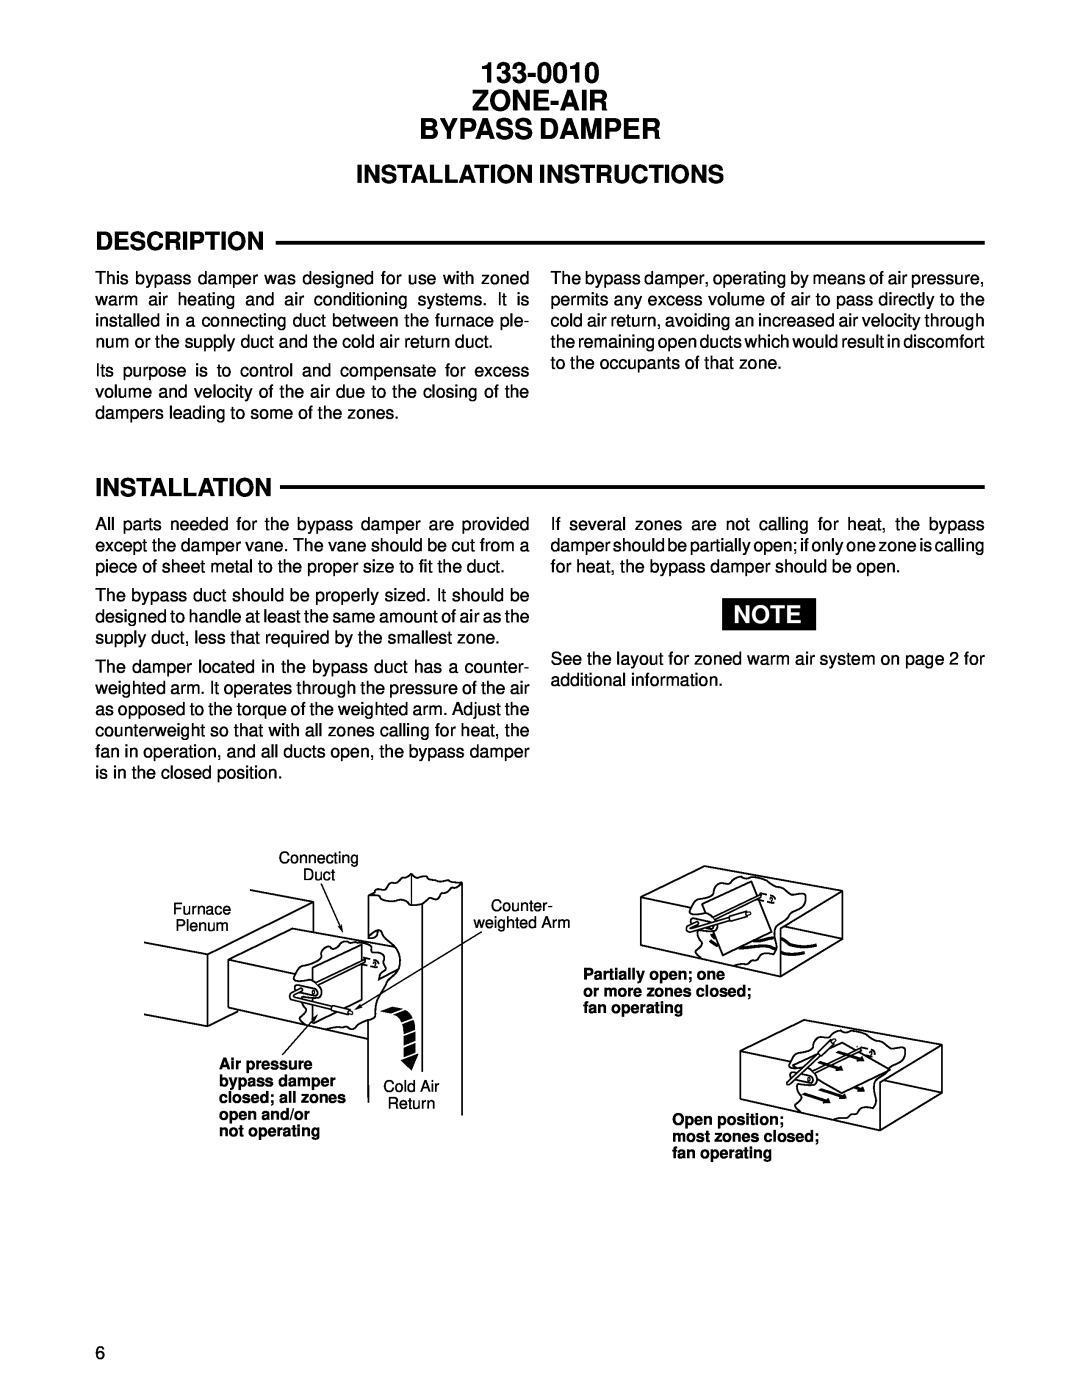 White Rodgers 2061 installation instructions Zone-Air Bypass Damper, Installation Instructions Description 